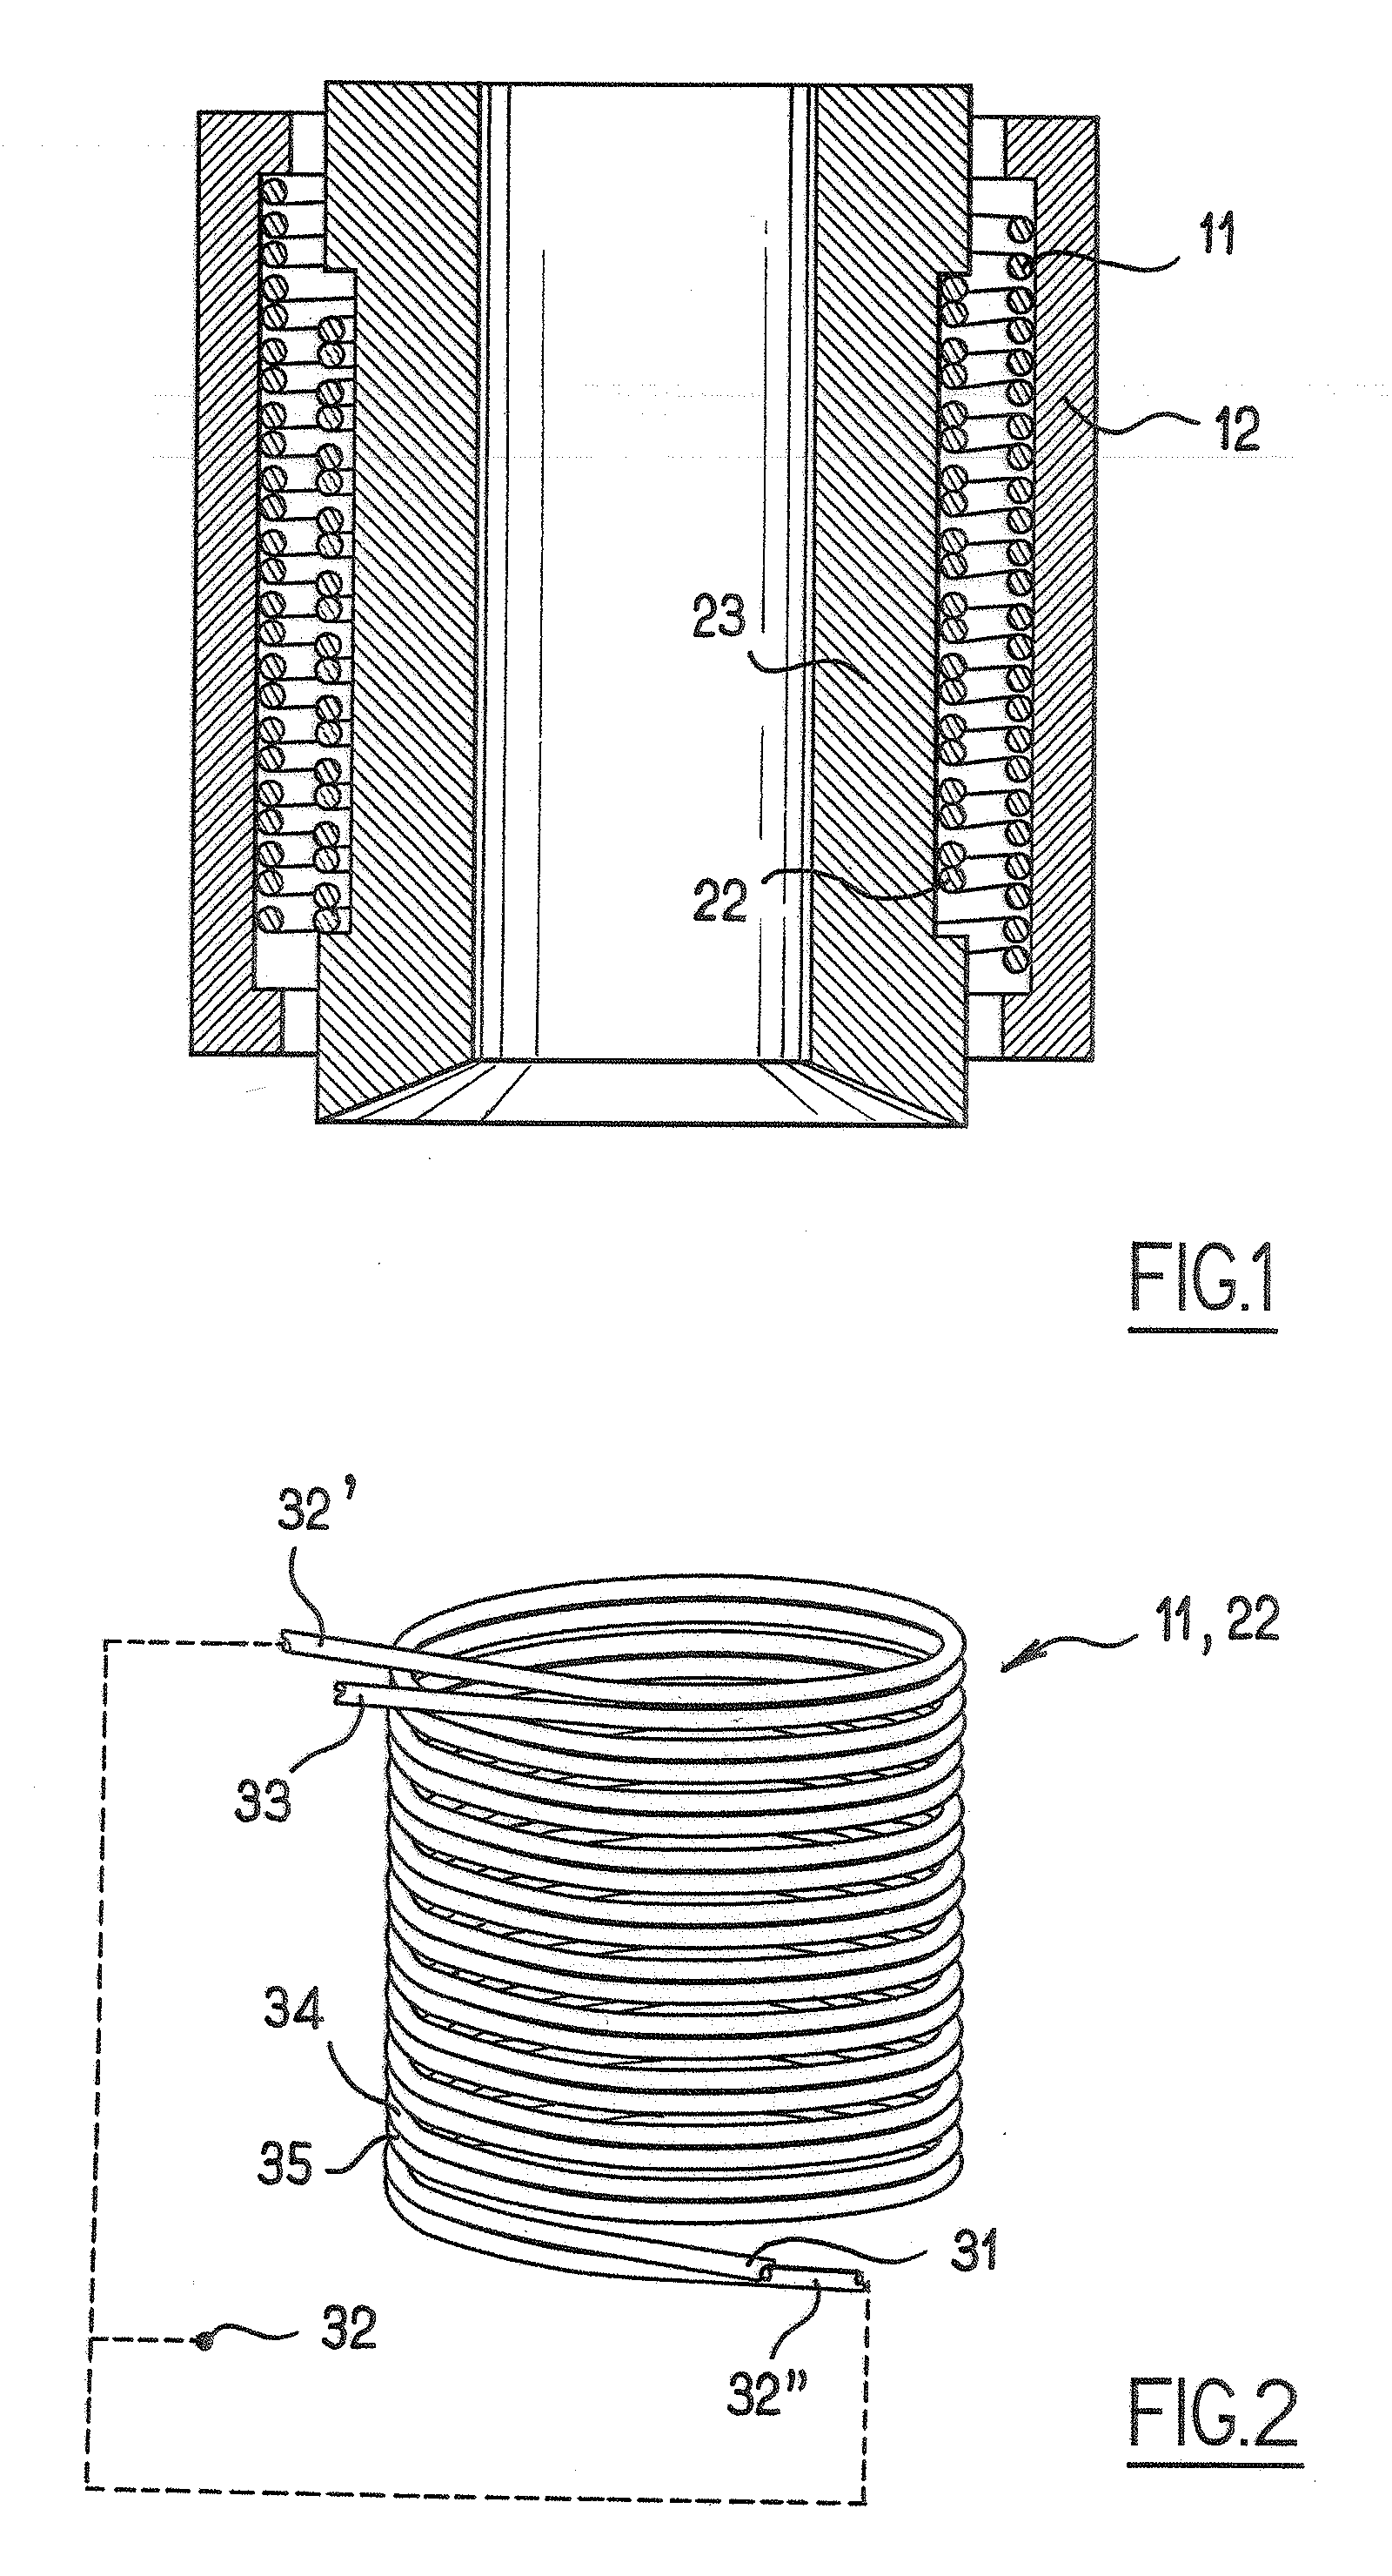 System for electrical power supply and for transmitting data without electrical contact